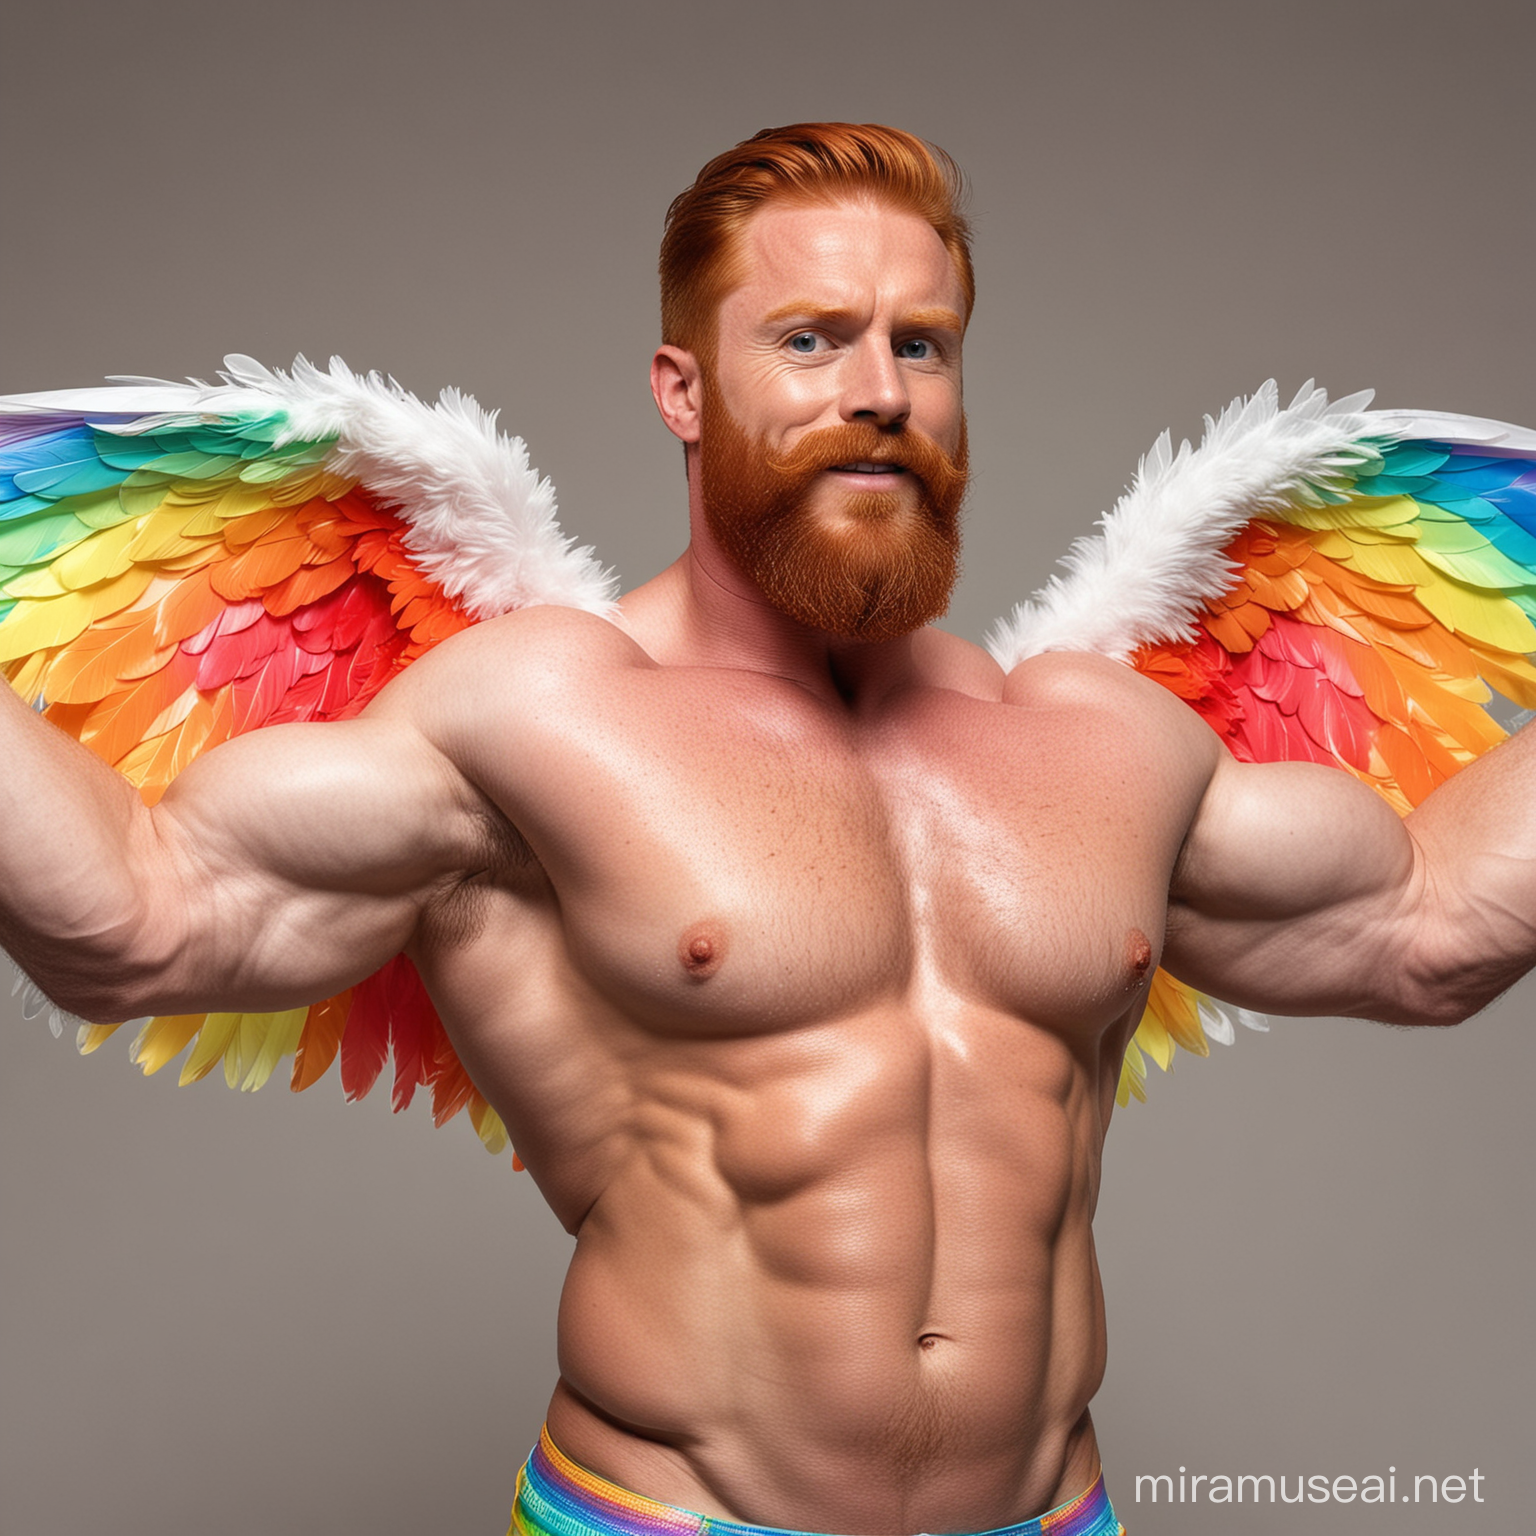 Ultra Beefy Redhead Bodybuilder Flexing Big Strong Arm in Rainbow Colored Jacket with Eagle Wings